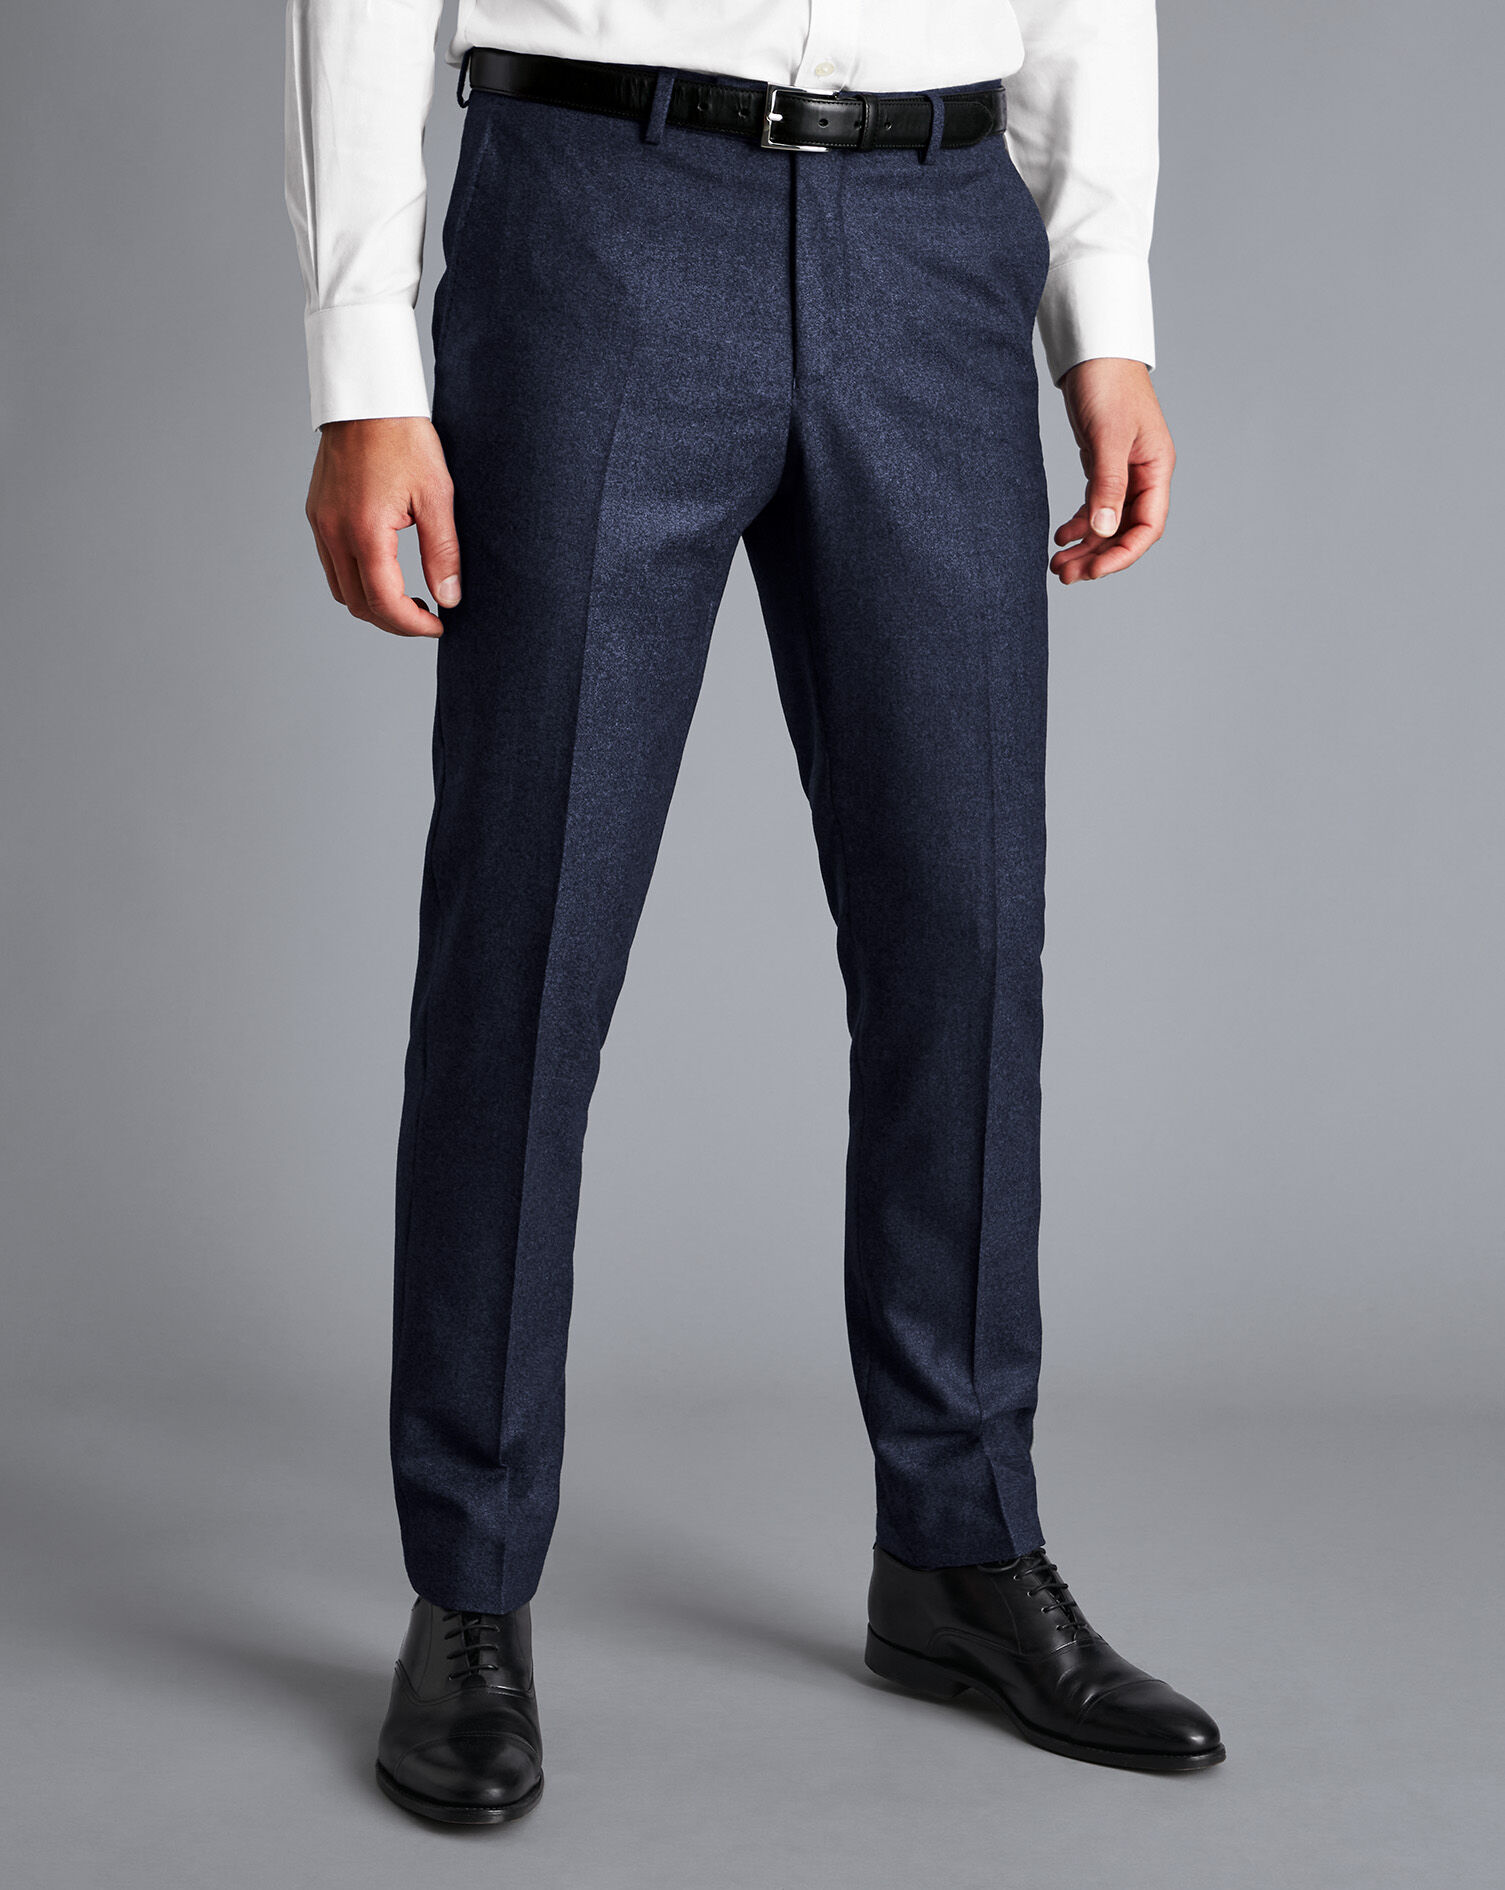 Details more than 130 mens tapered tuxedo pants best